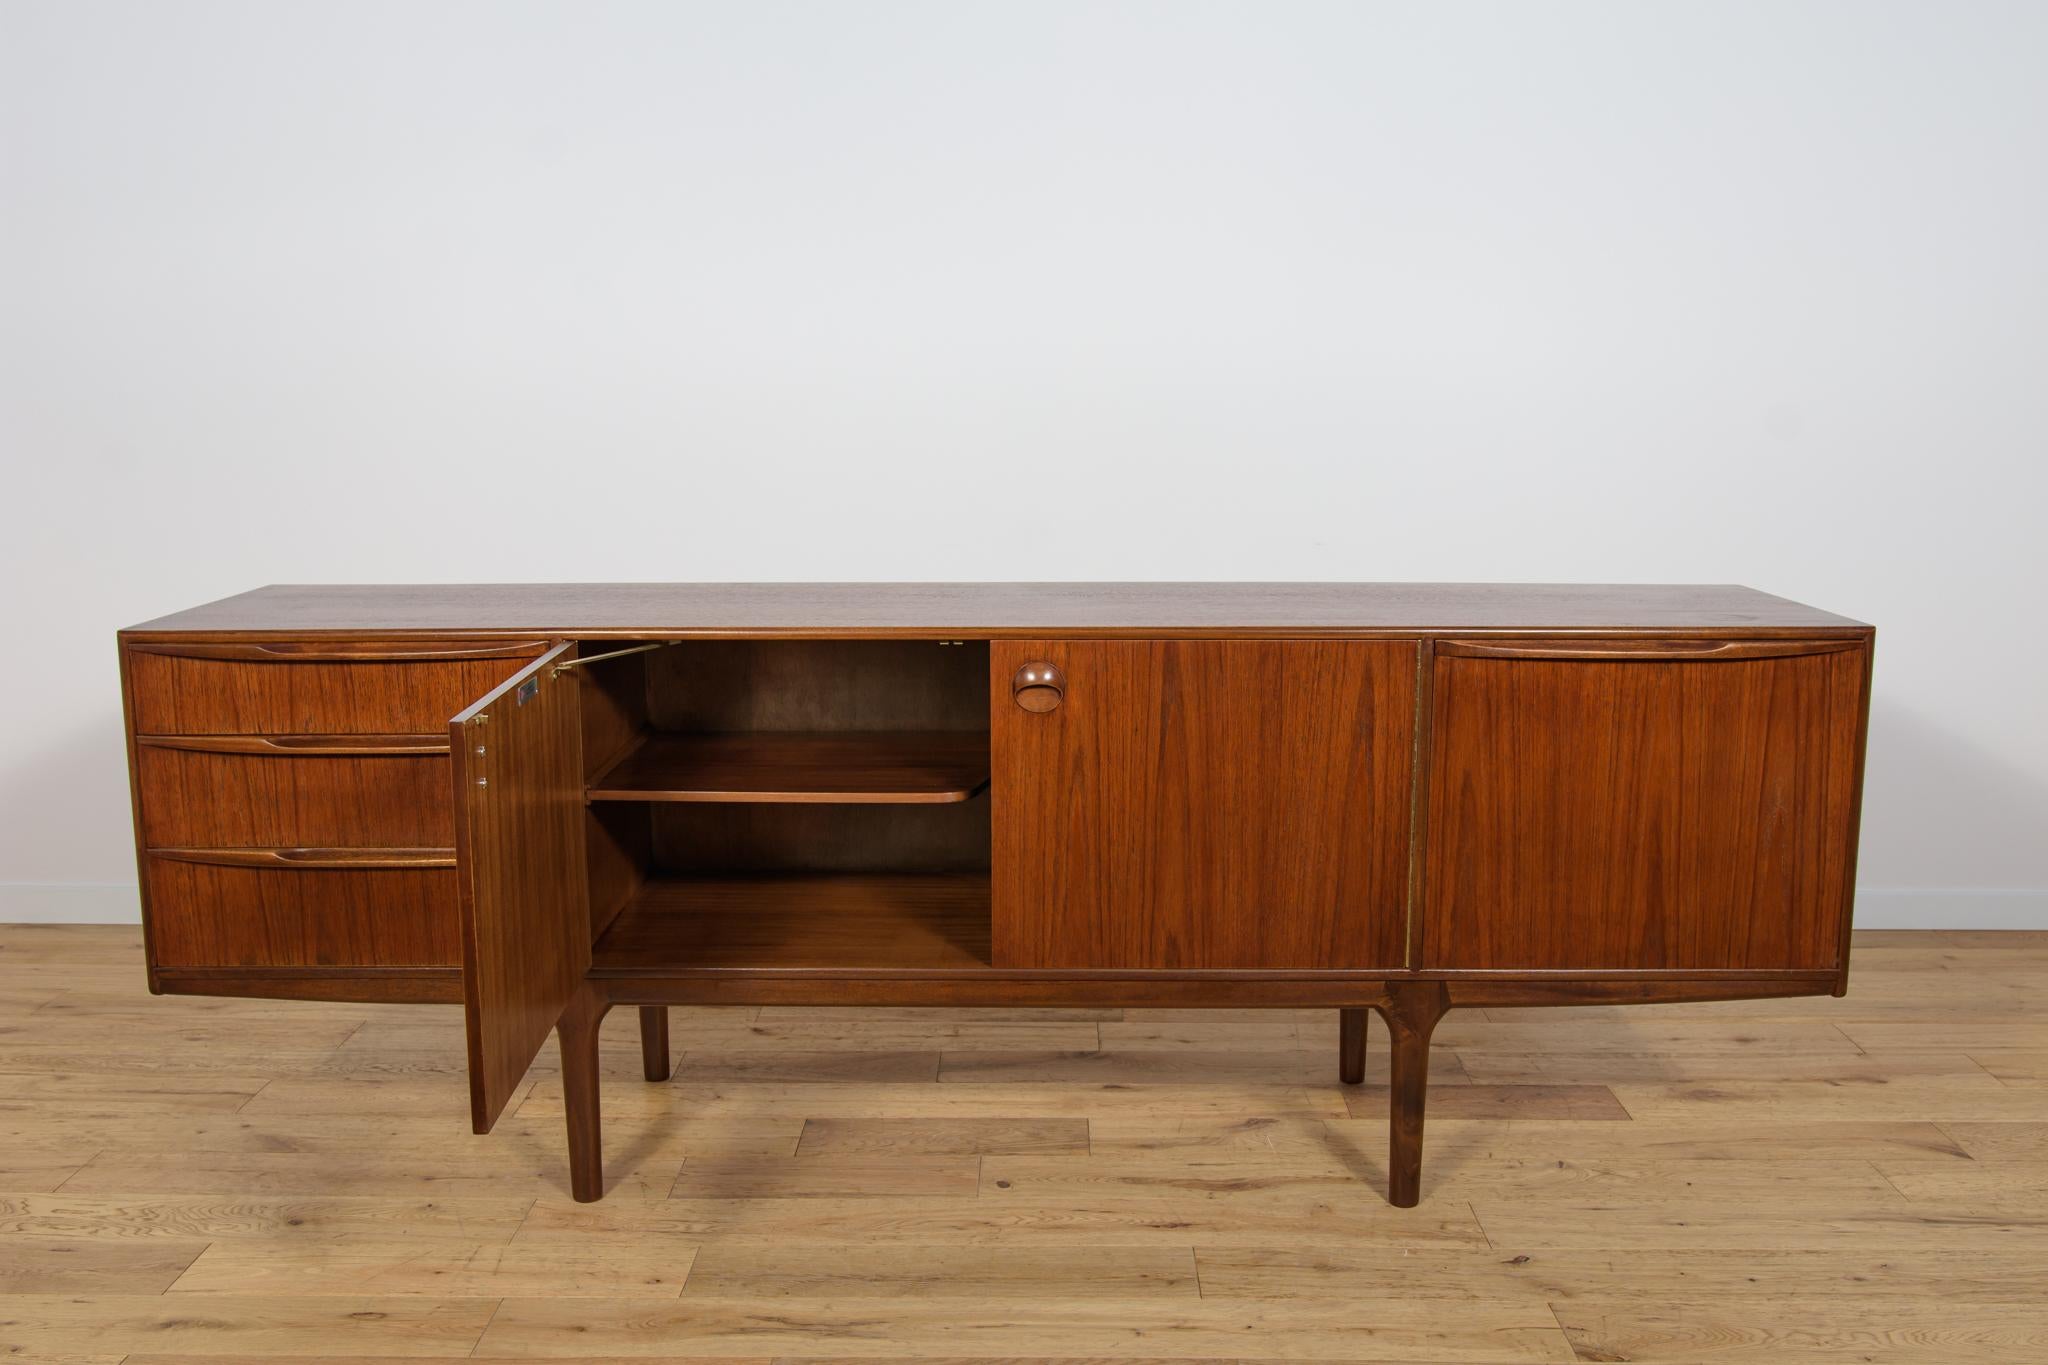  Mid-Century Teak Sideboard by Tom Robertson for McIntosh, United Knigdom, 1960s For Sale 4